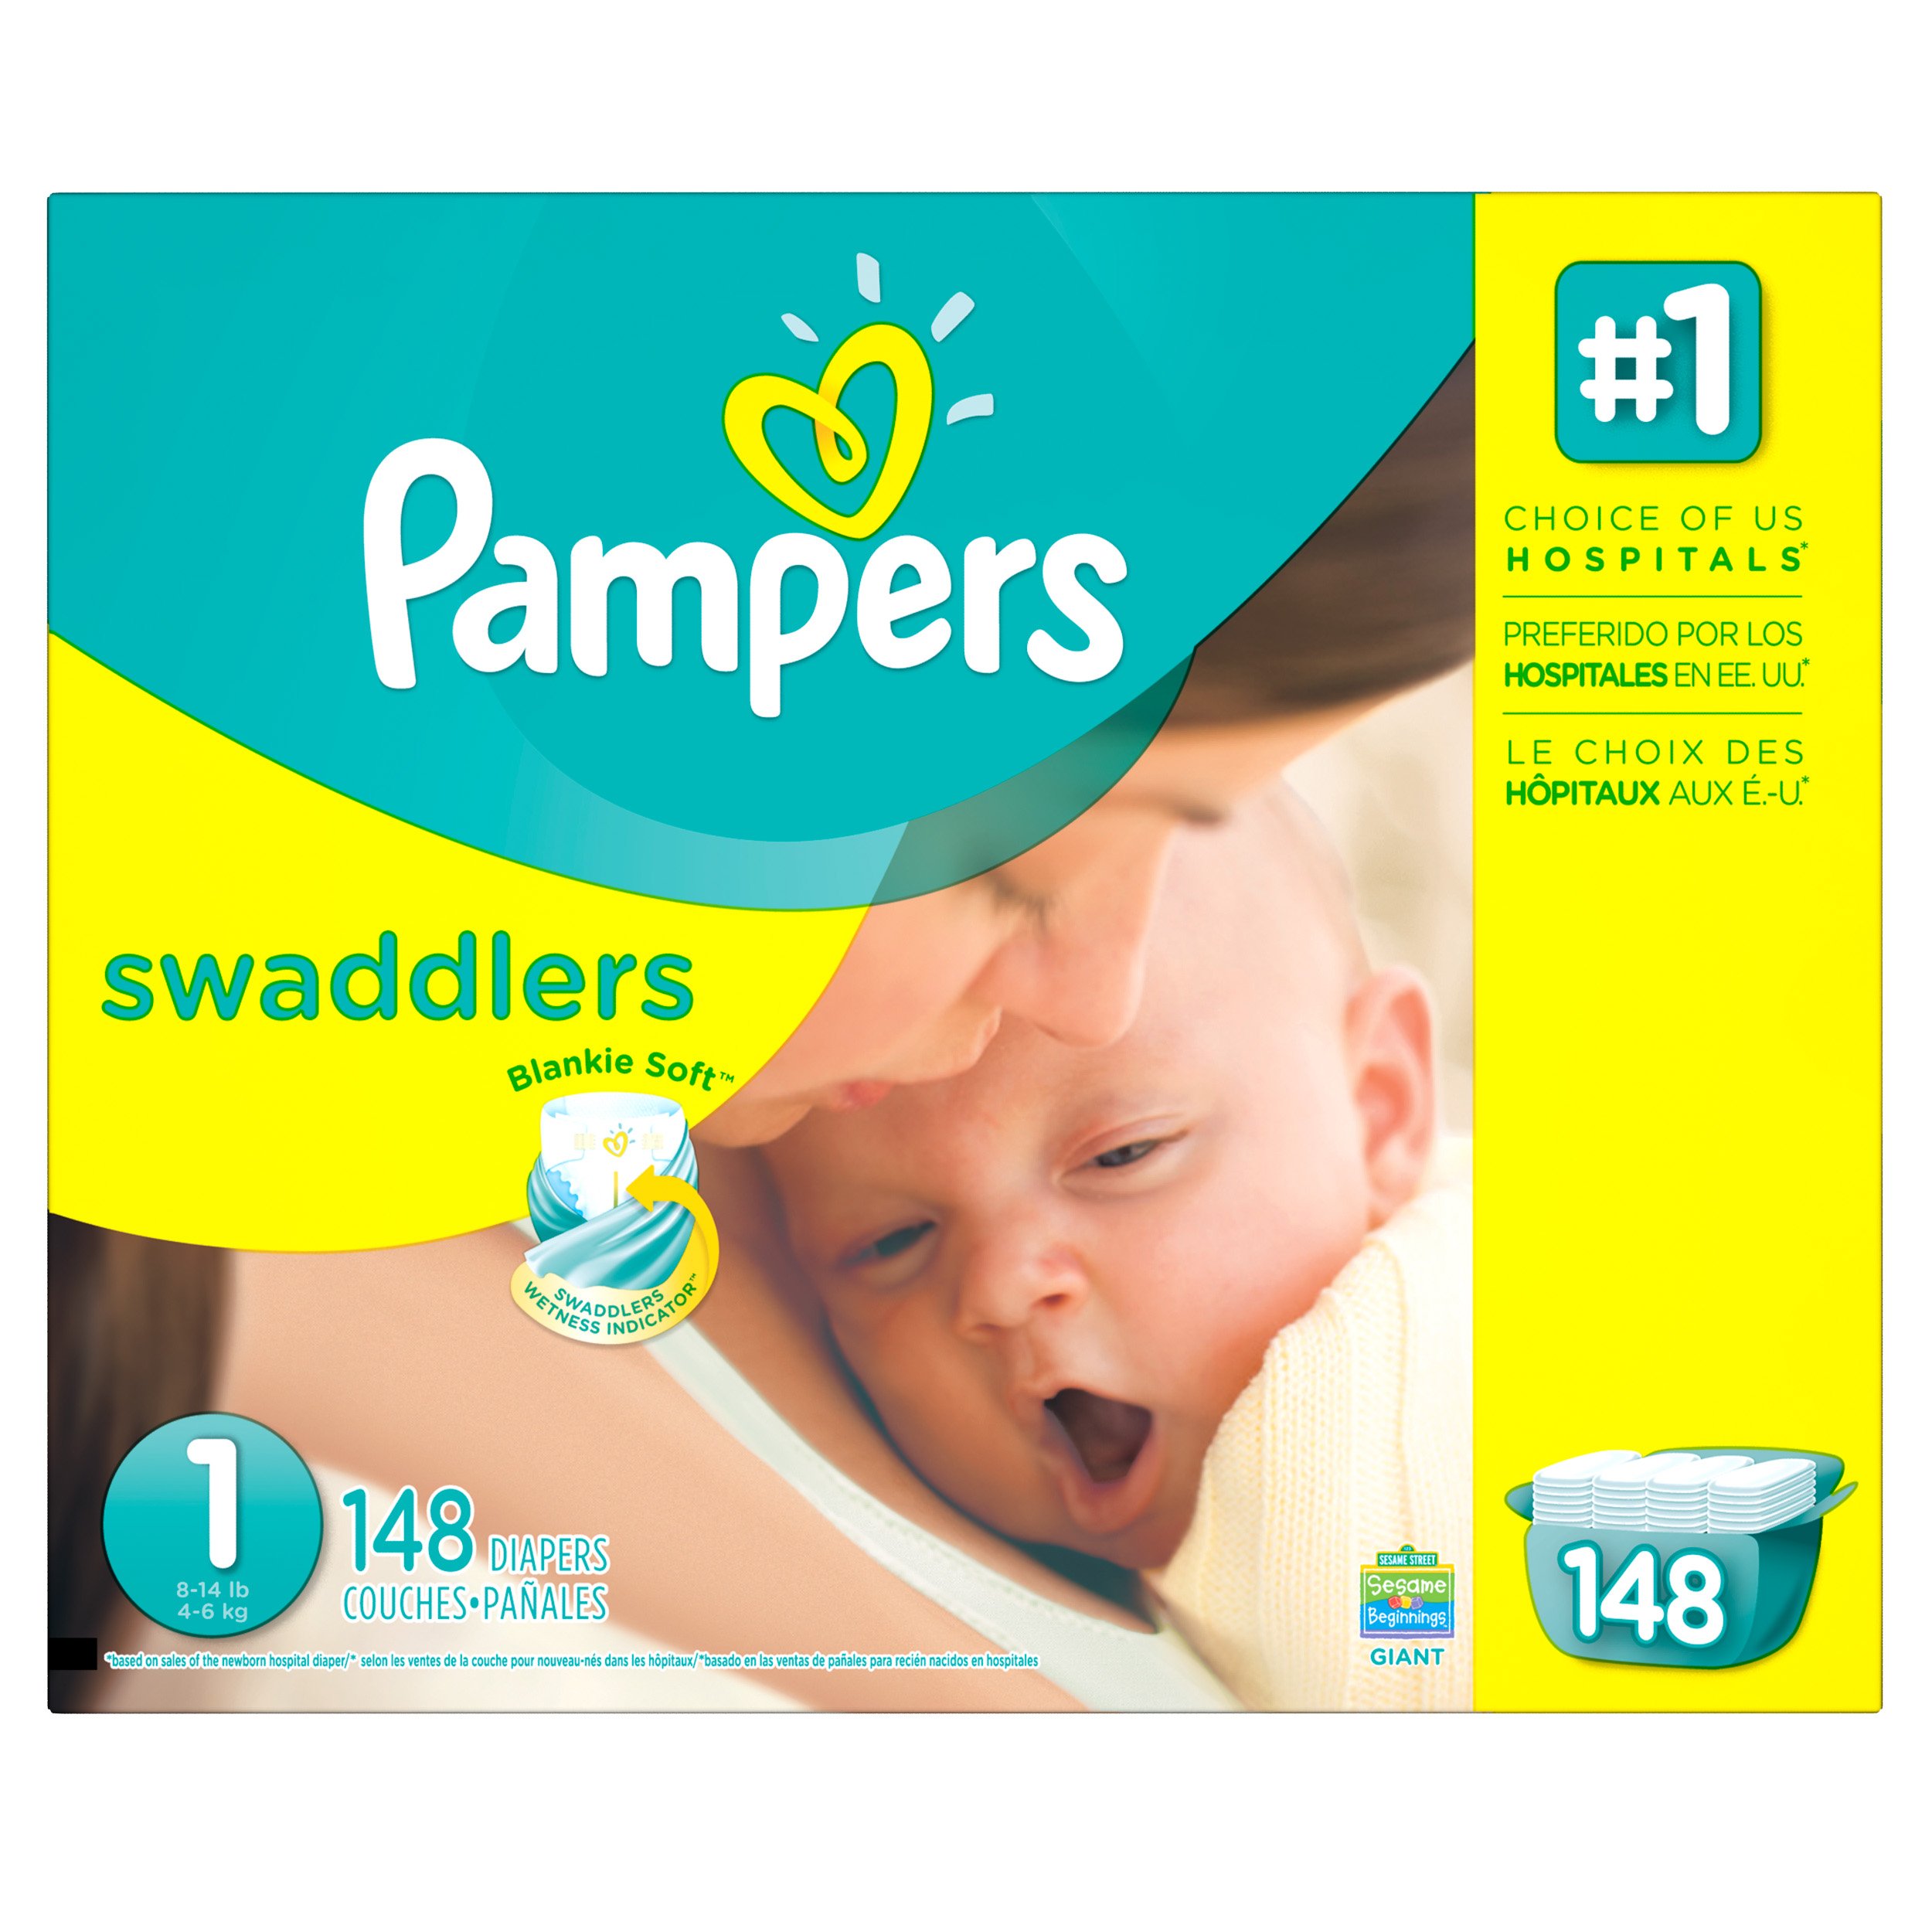 Pampers Swaddlers Disposable Diapers Newborn Size 1 (8-14 lb), 148 Count, GIANT (Packaging May Vary)